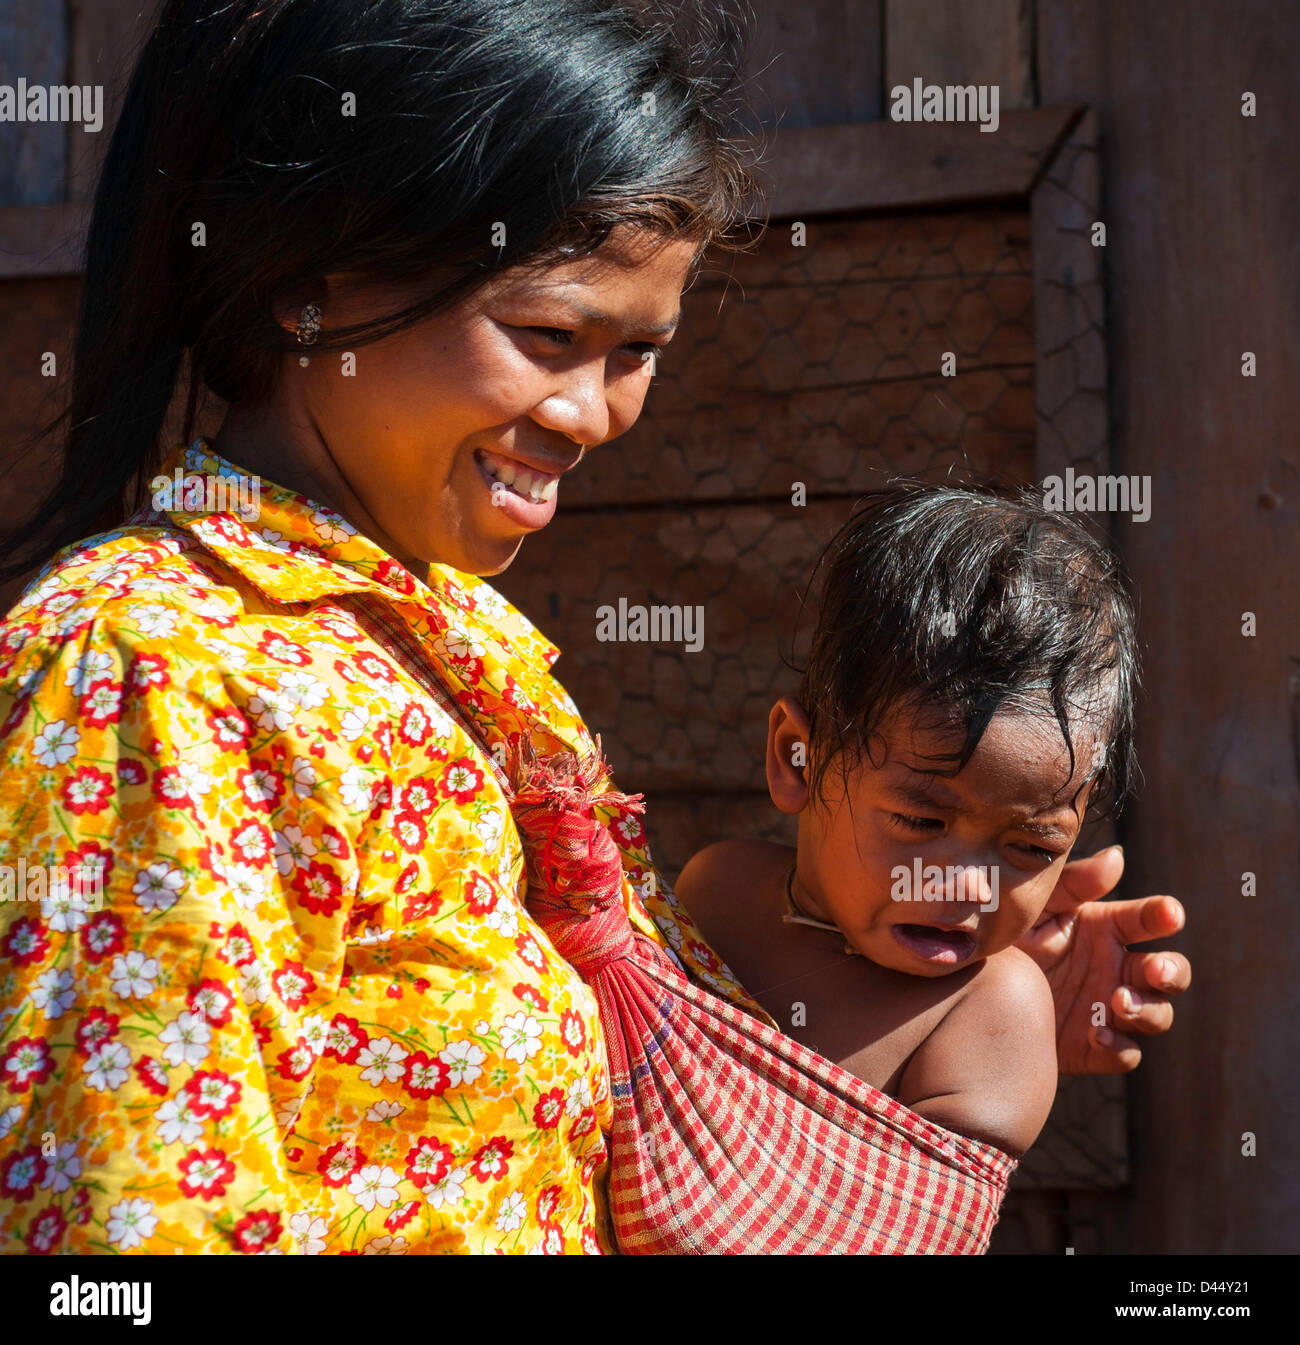 Cambodia mother with child in shawl Stock Photo